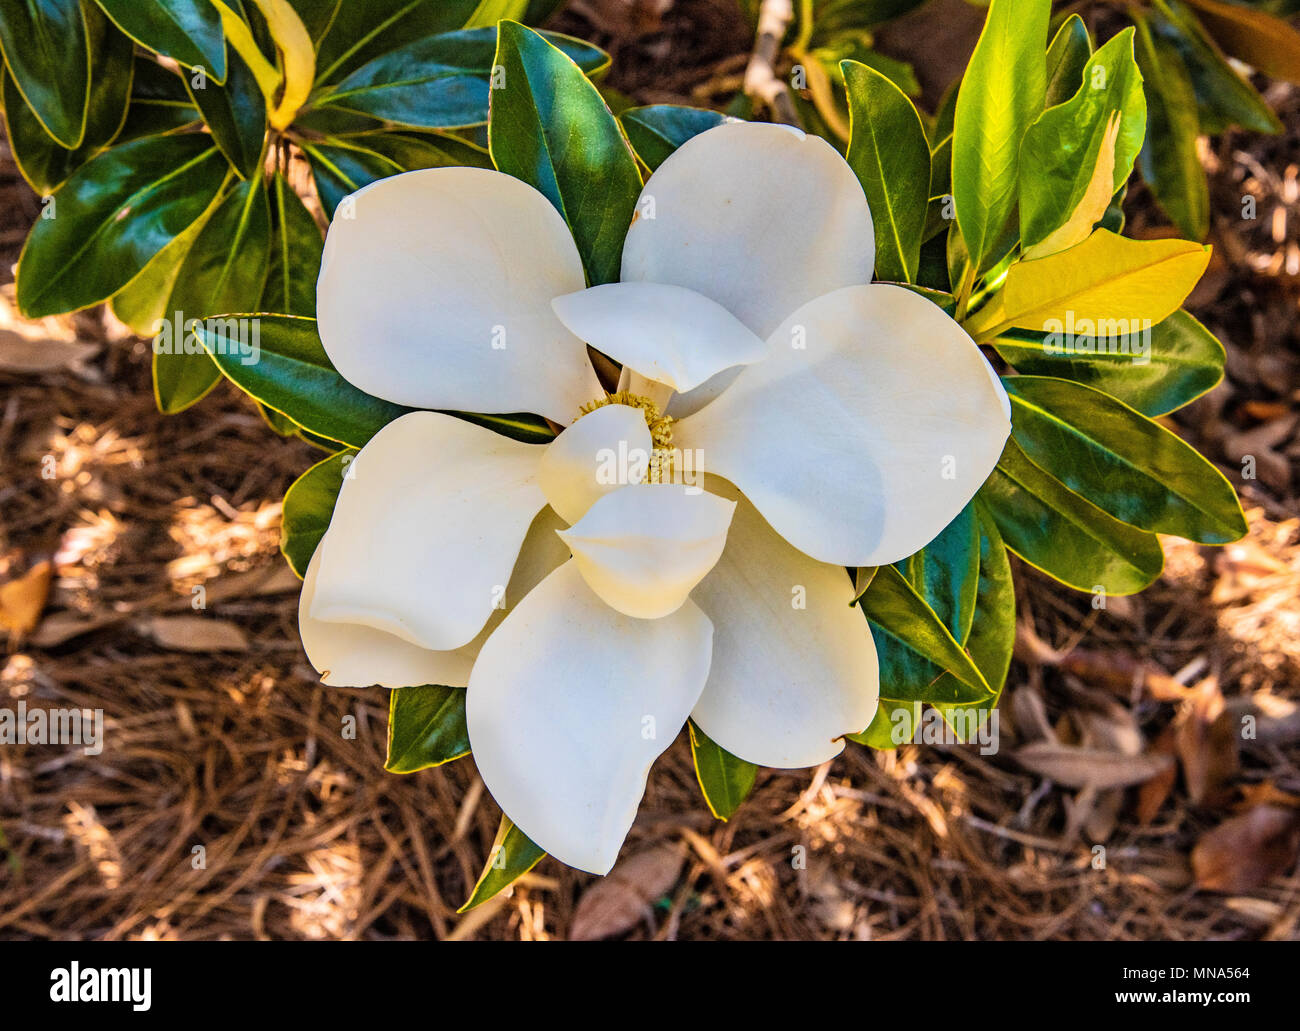 Magnolia virginiana is a small tree widely used in decorative lanscaping in the American Deep South. Stock Photo